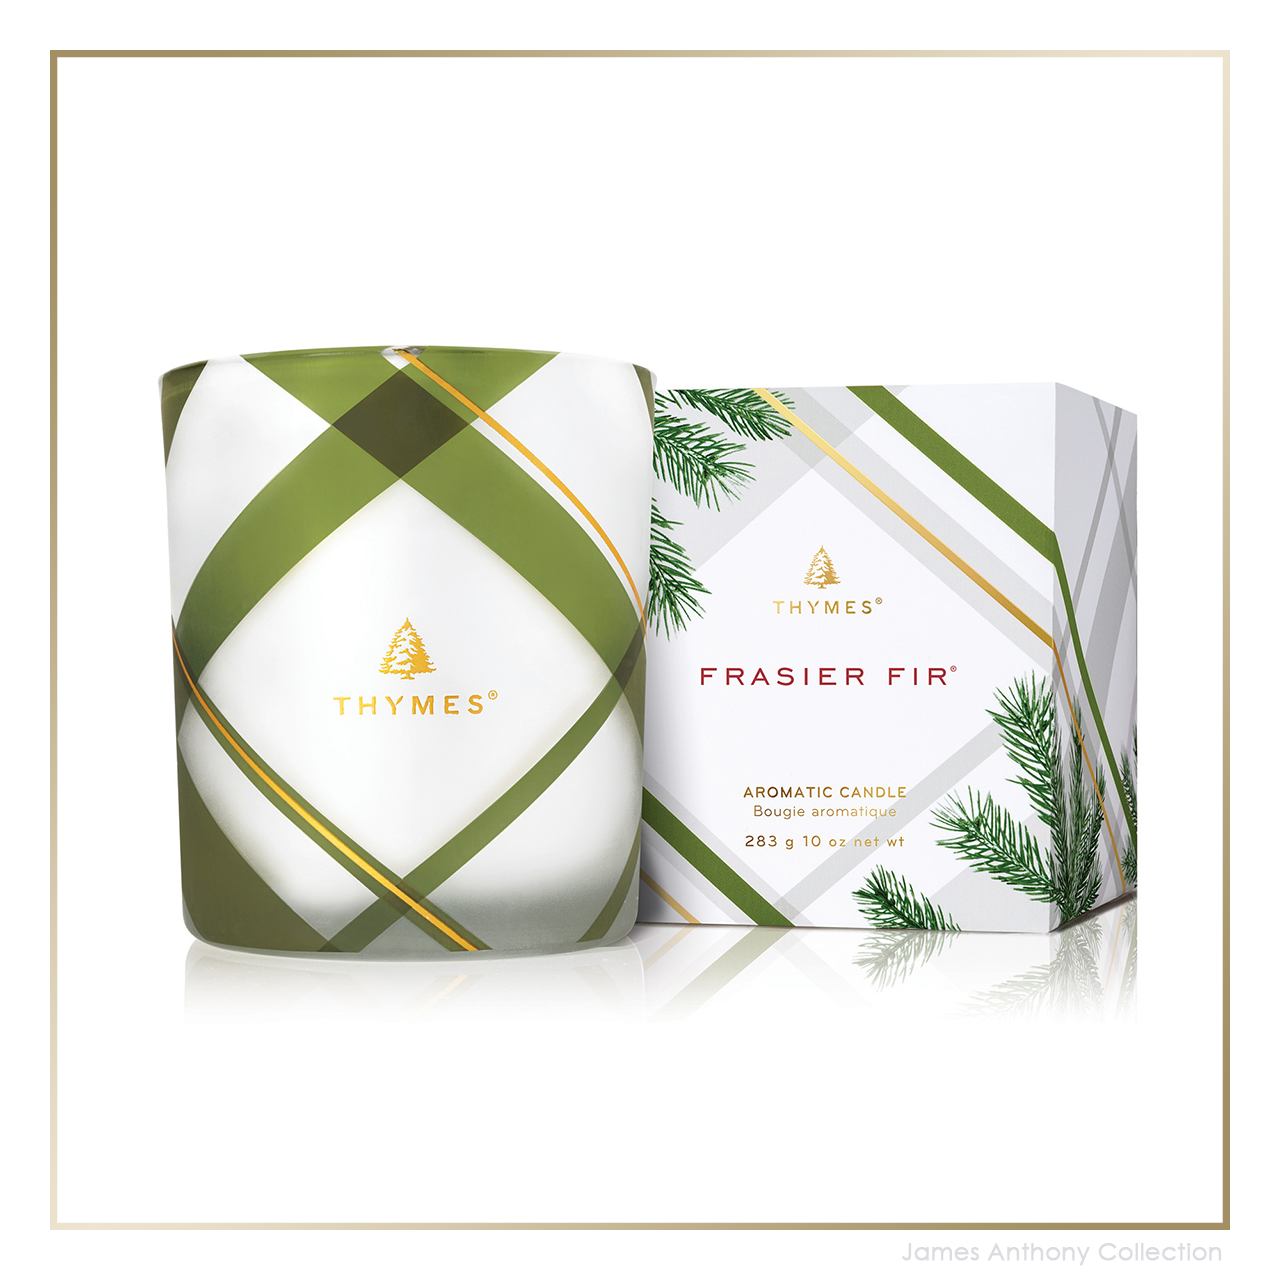 Frasier Fir Candle and Diffuser Gift Set